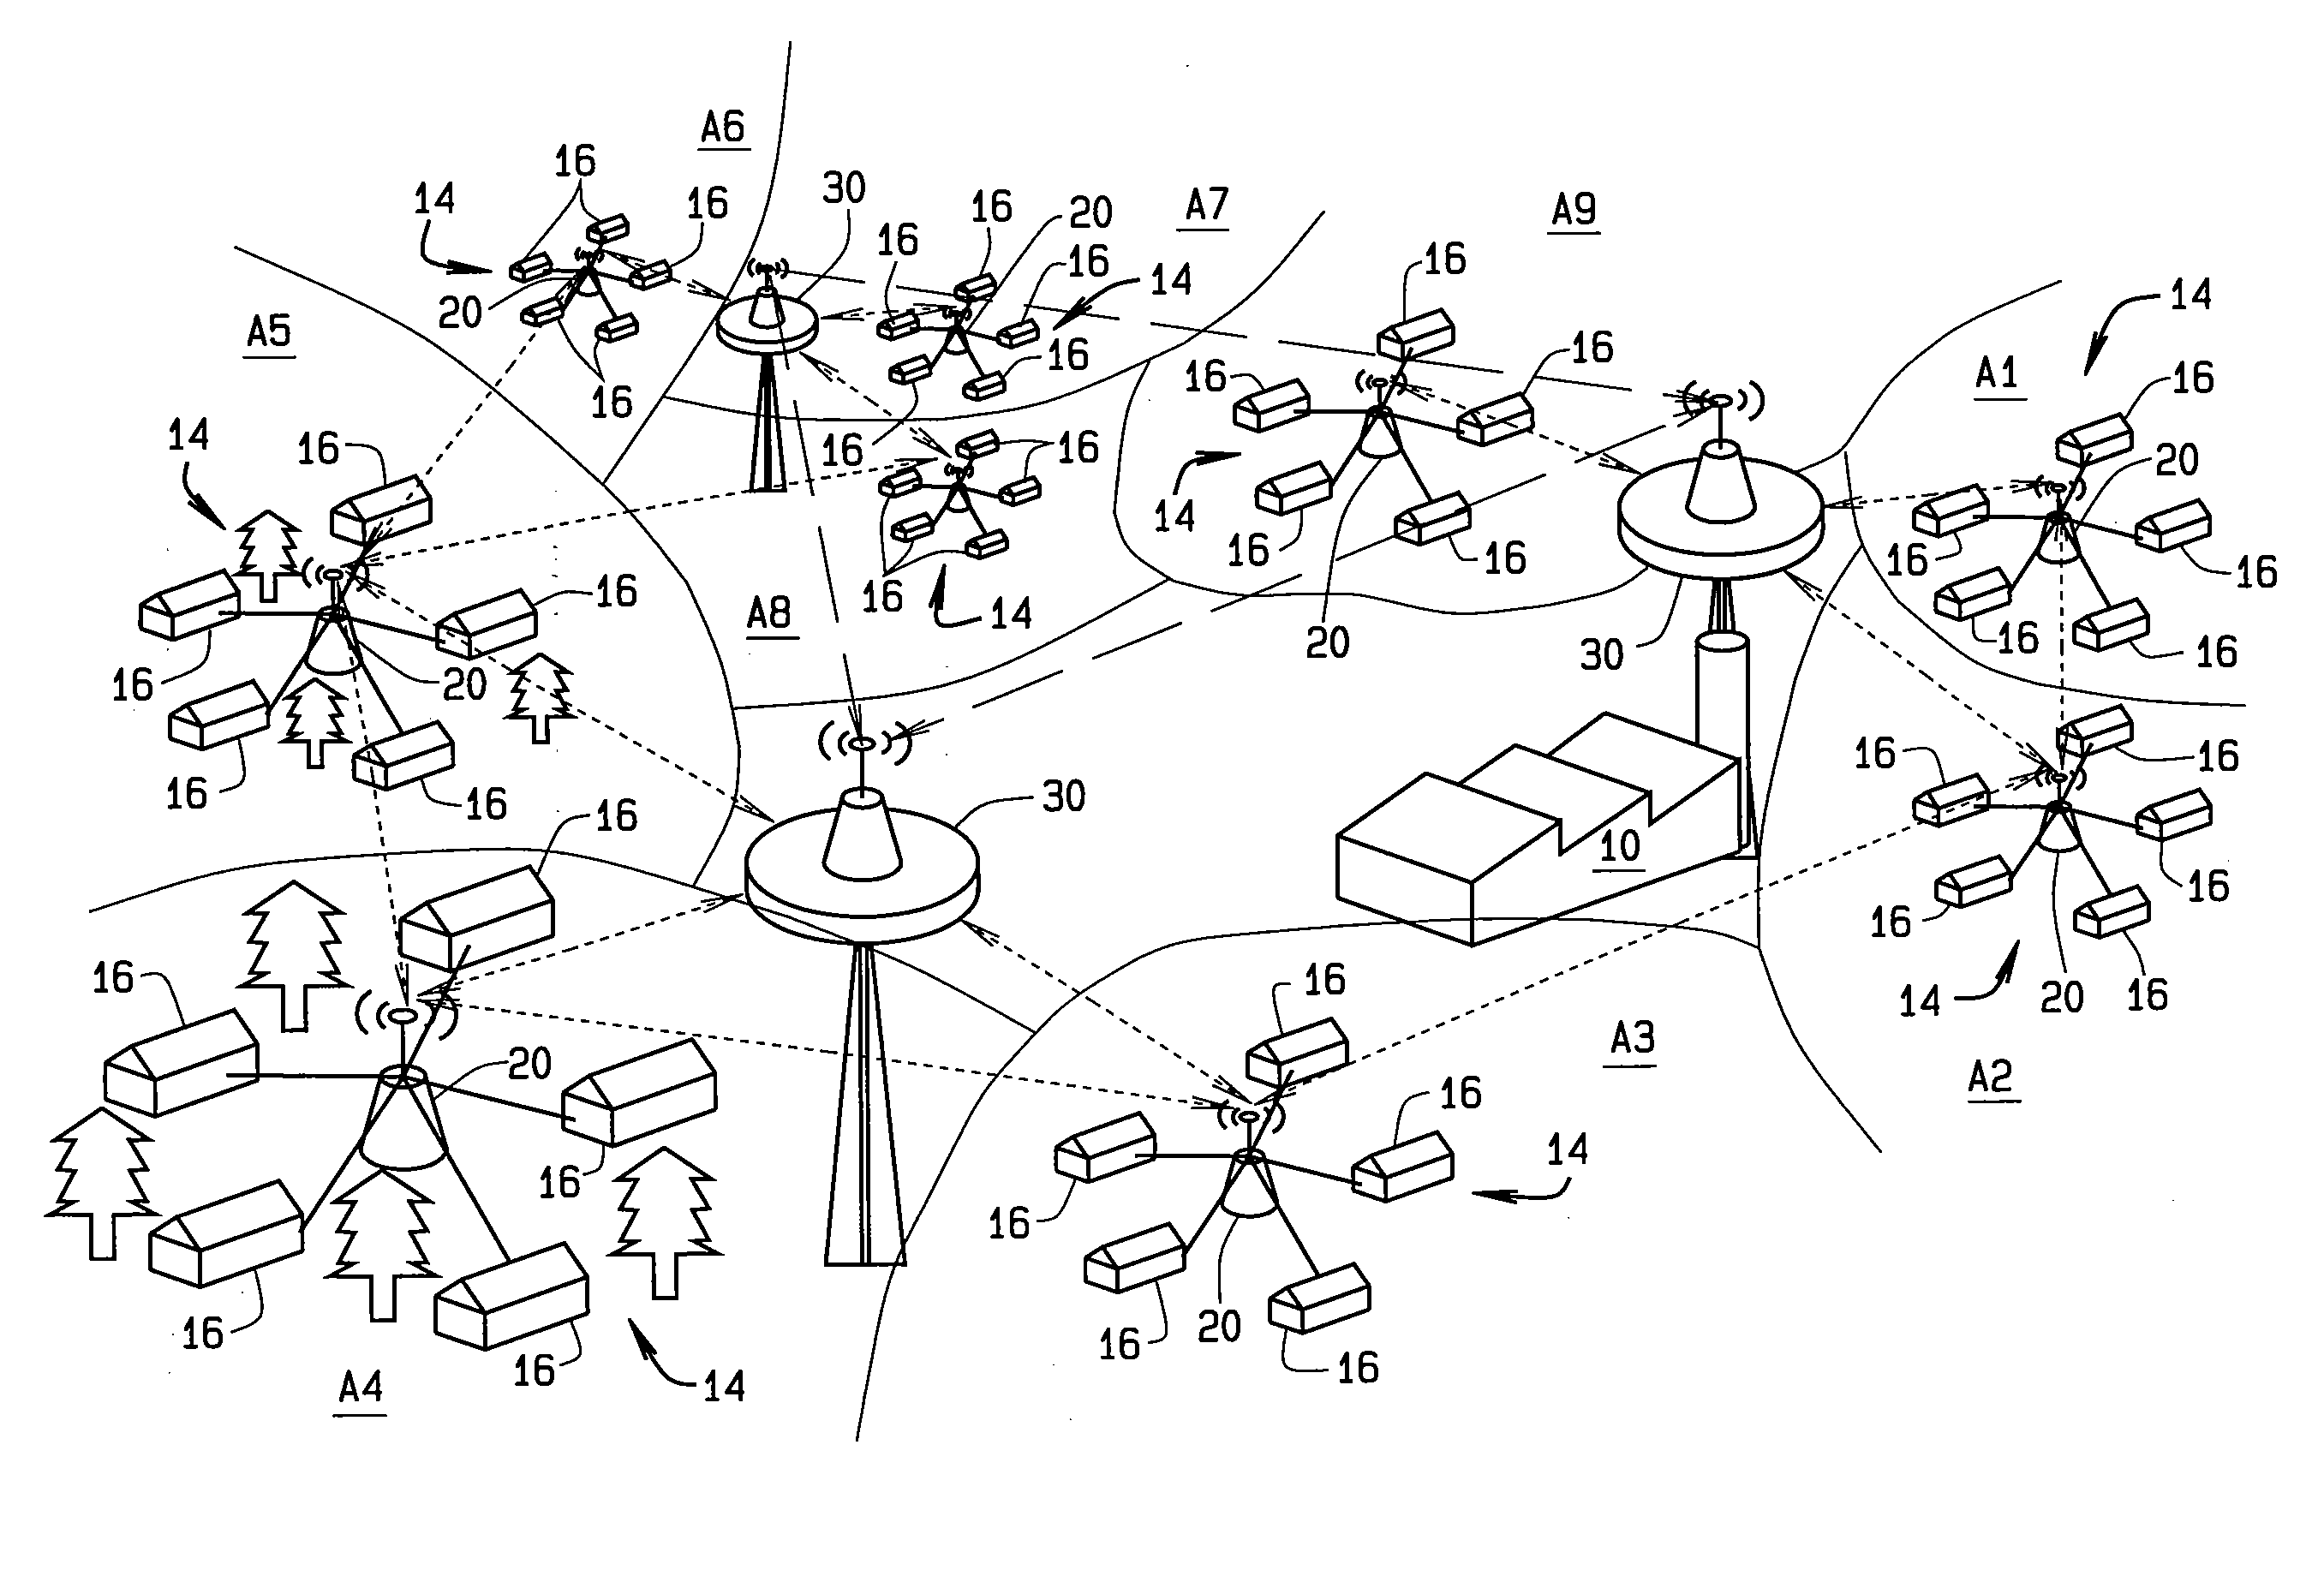 Wireless broadband communications network for a utility